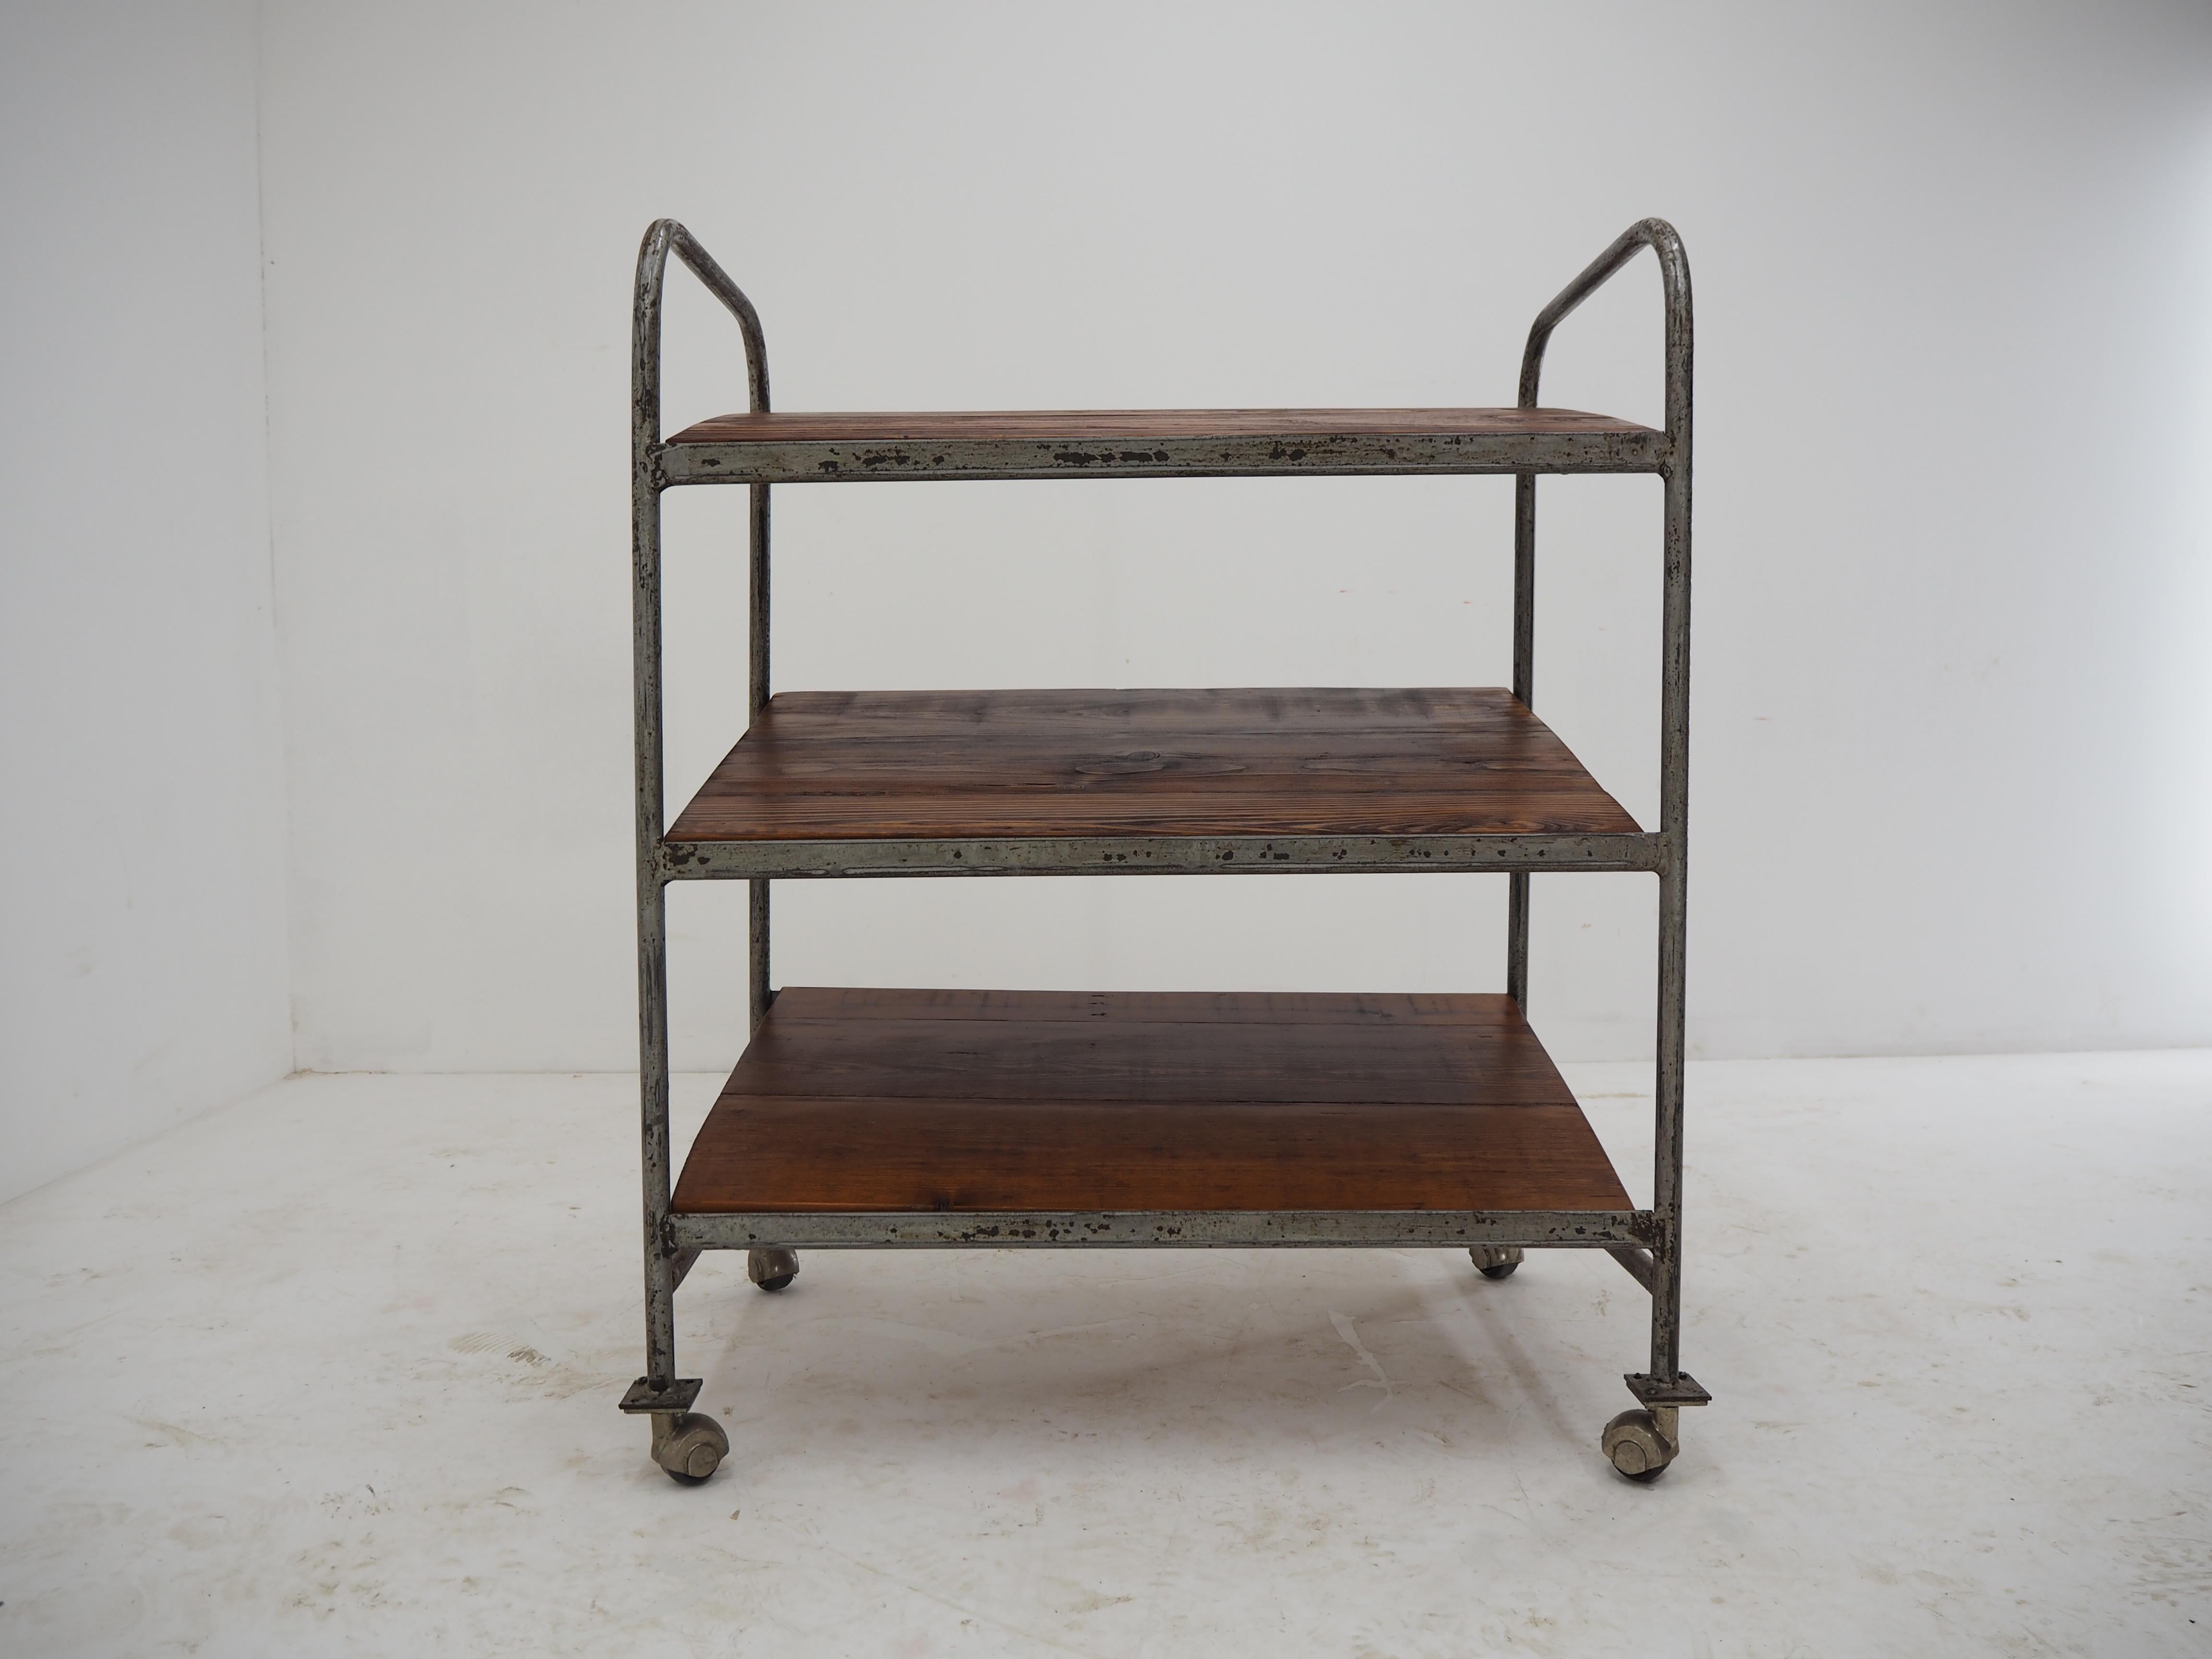 Midcentury Industrial Shelves, Trolley In Good Condition For Sale In Praha, CZ